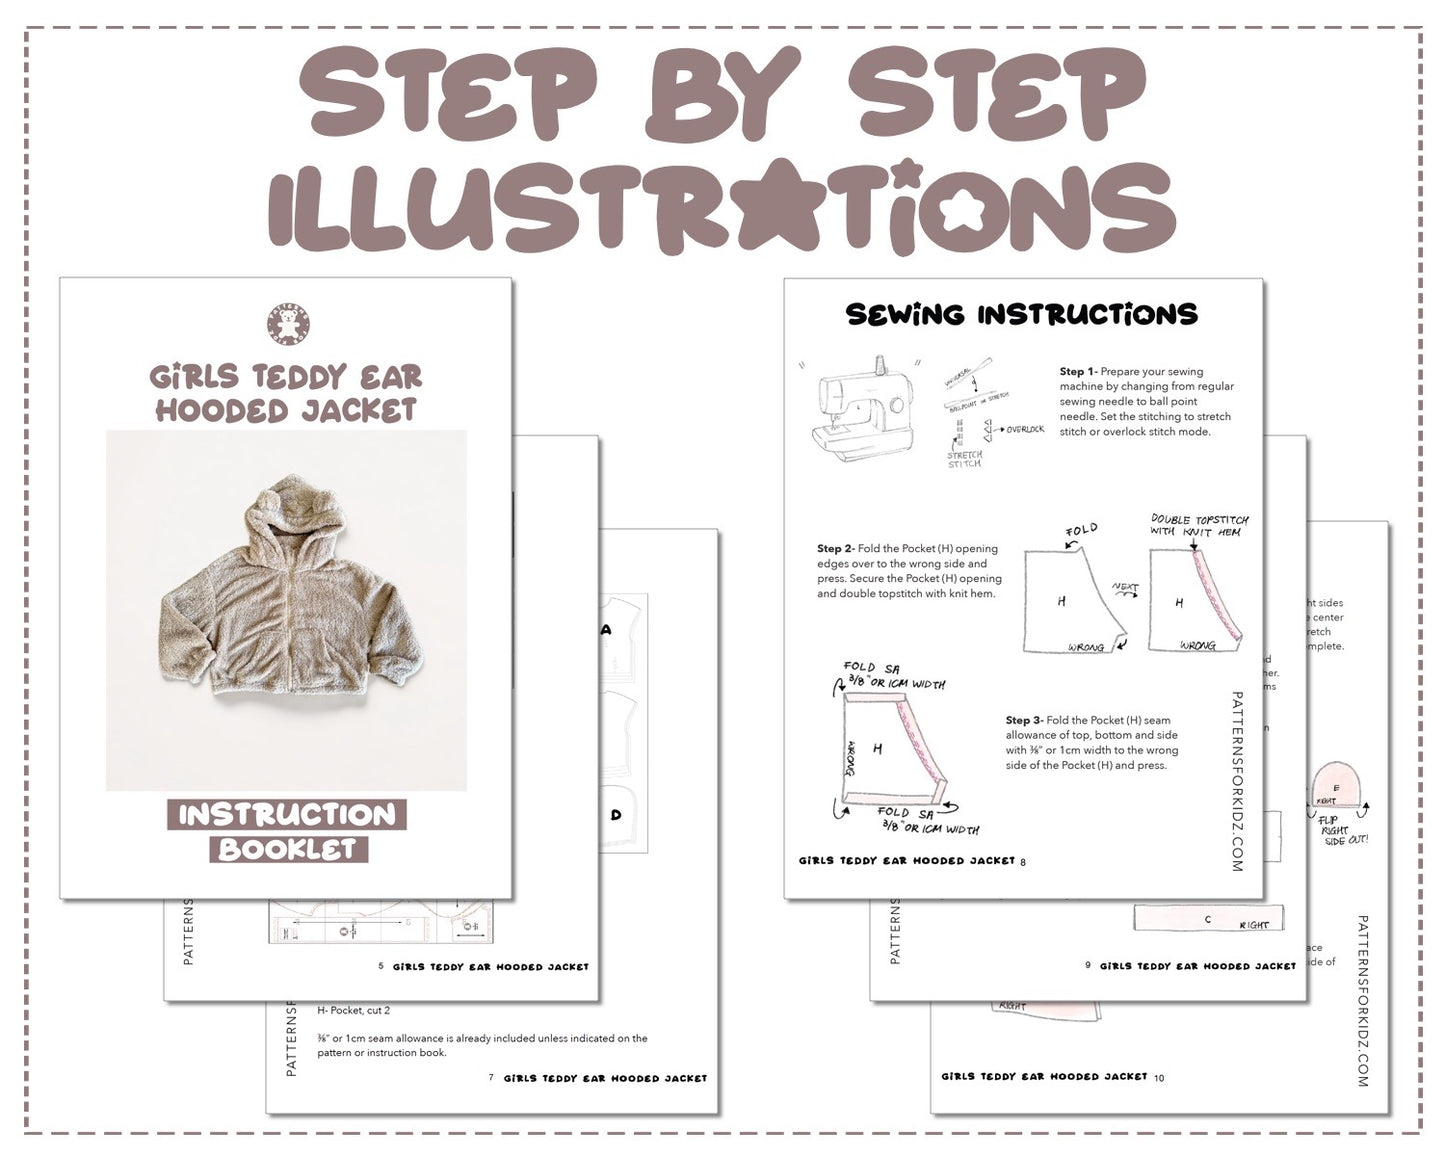 Girls Teddy Ear Hooded Jacket sewing pattern step by step illustrations.